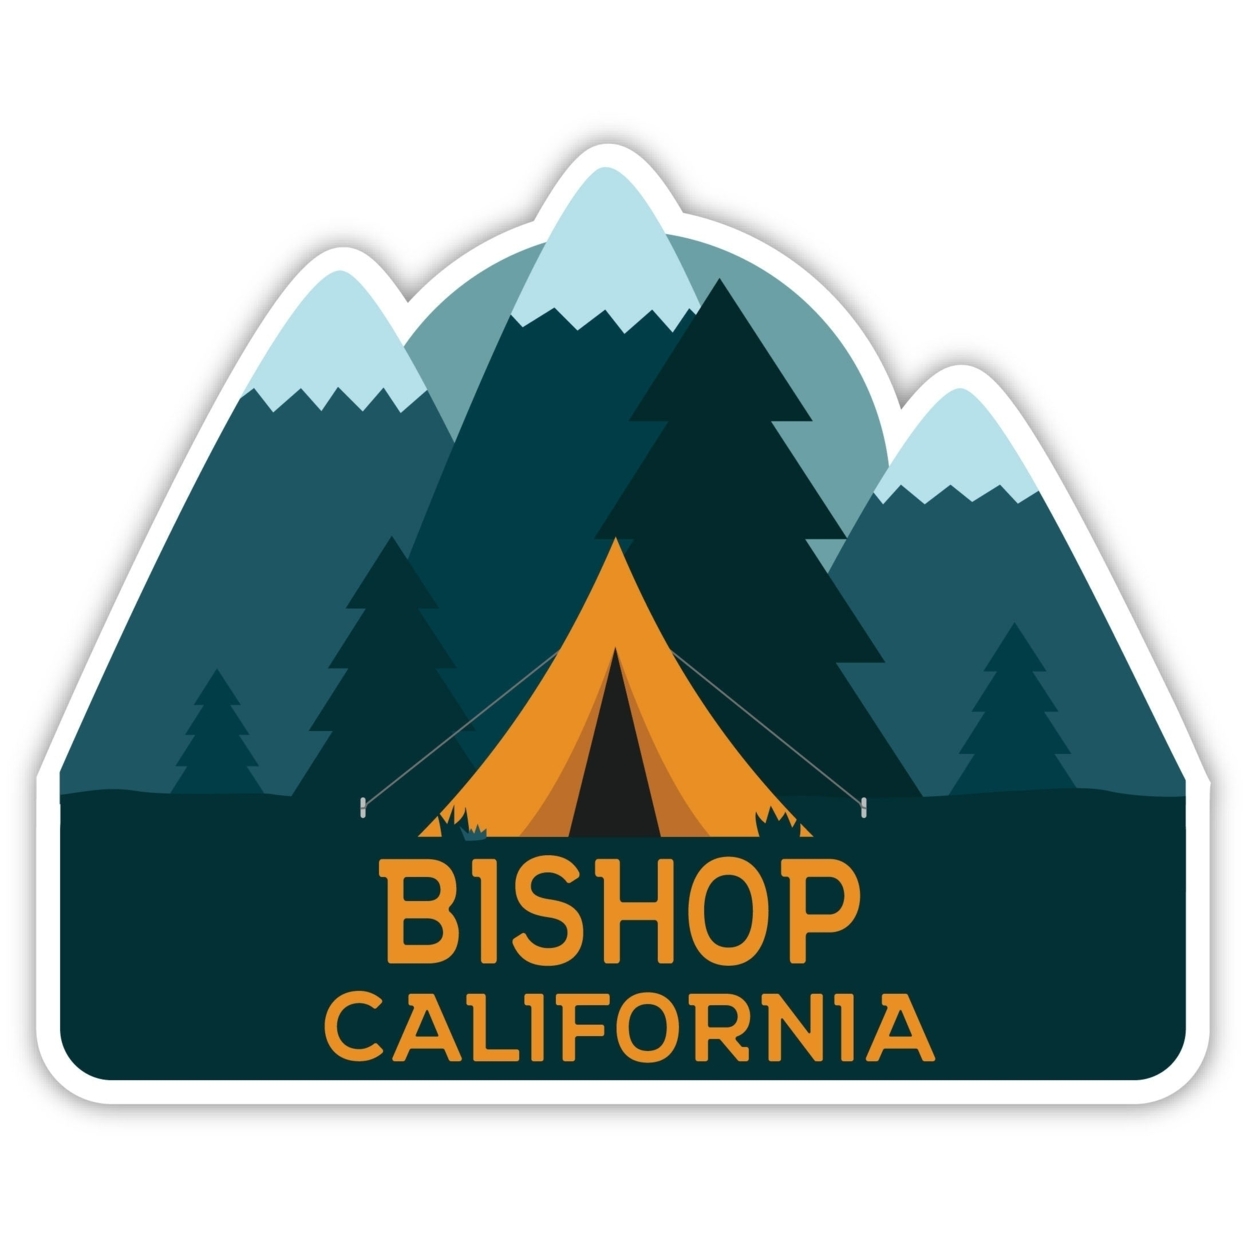 Bishop California Souvenir Decorative Stickers (Choose Theme And Size) - 4-Pack, 10-Inch, Tent